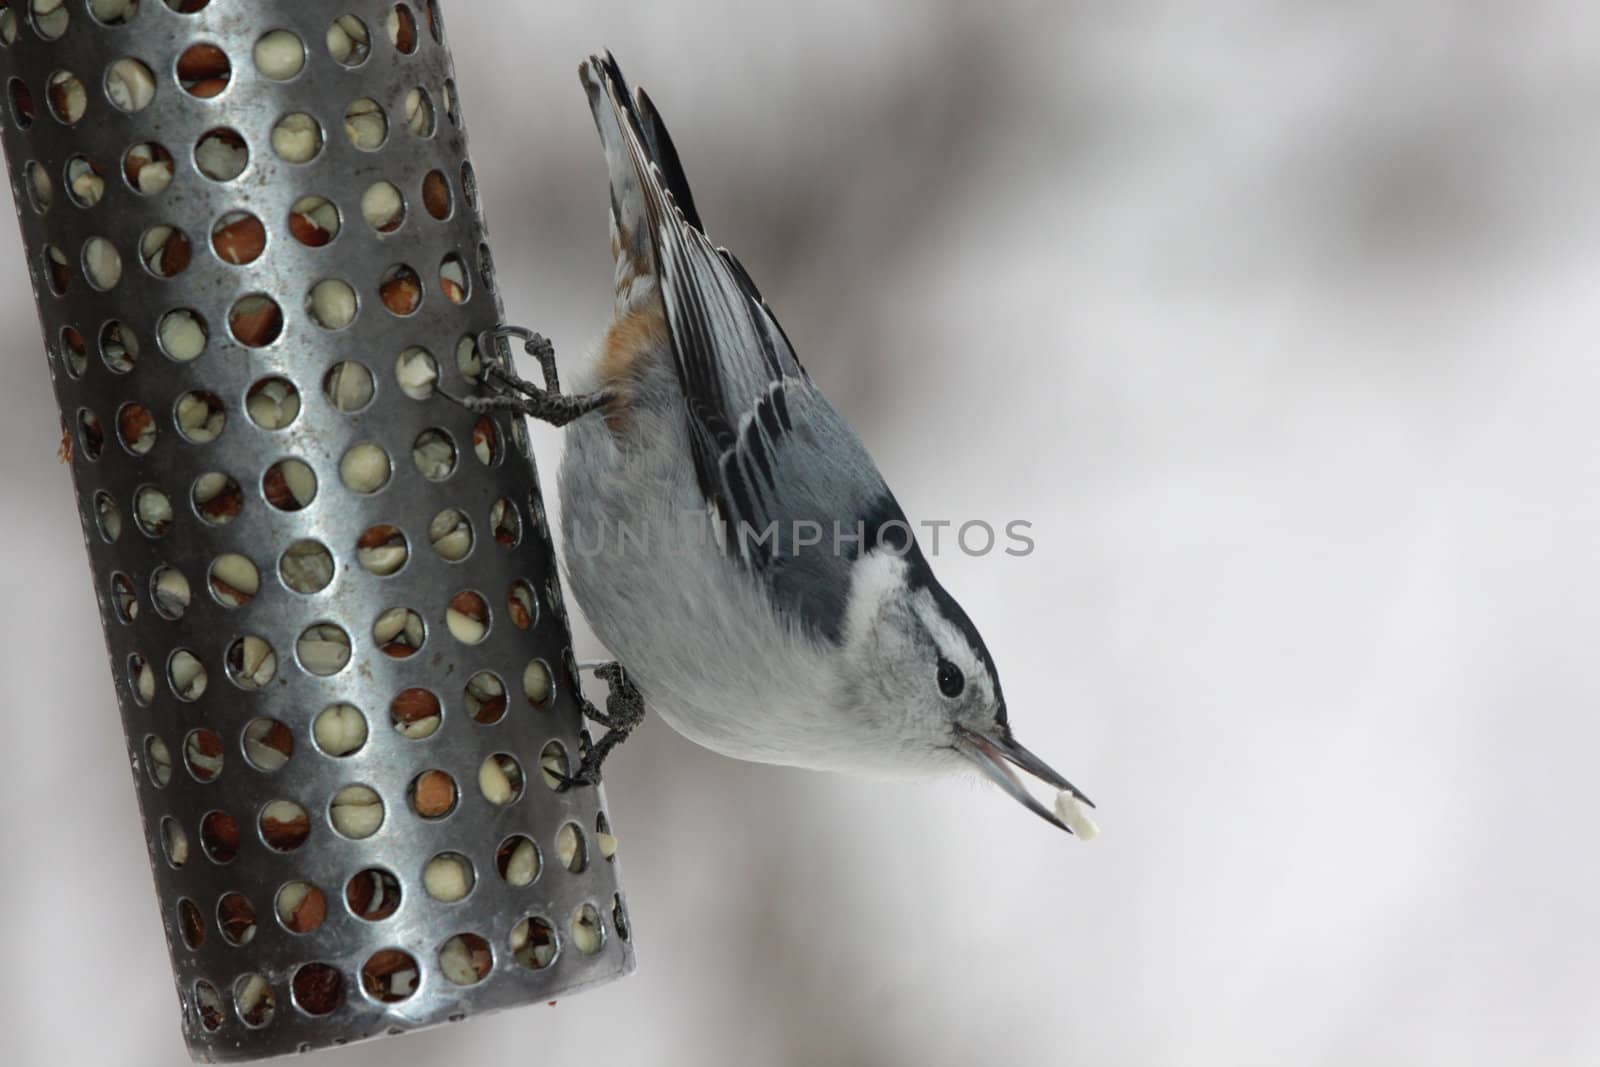 A feeding white-breasted nuthatch (sitta carolinensis) with a piece of peanut in it's beak.
